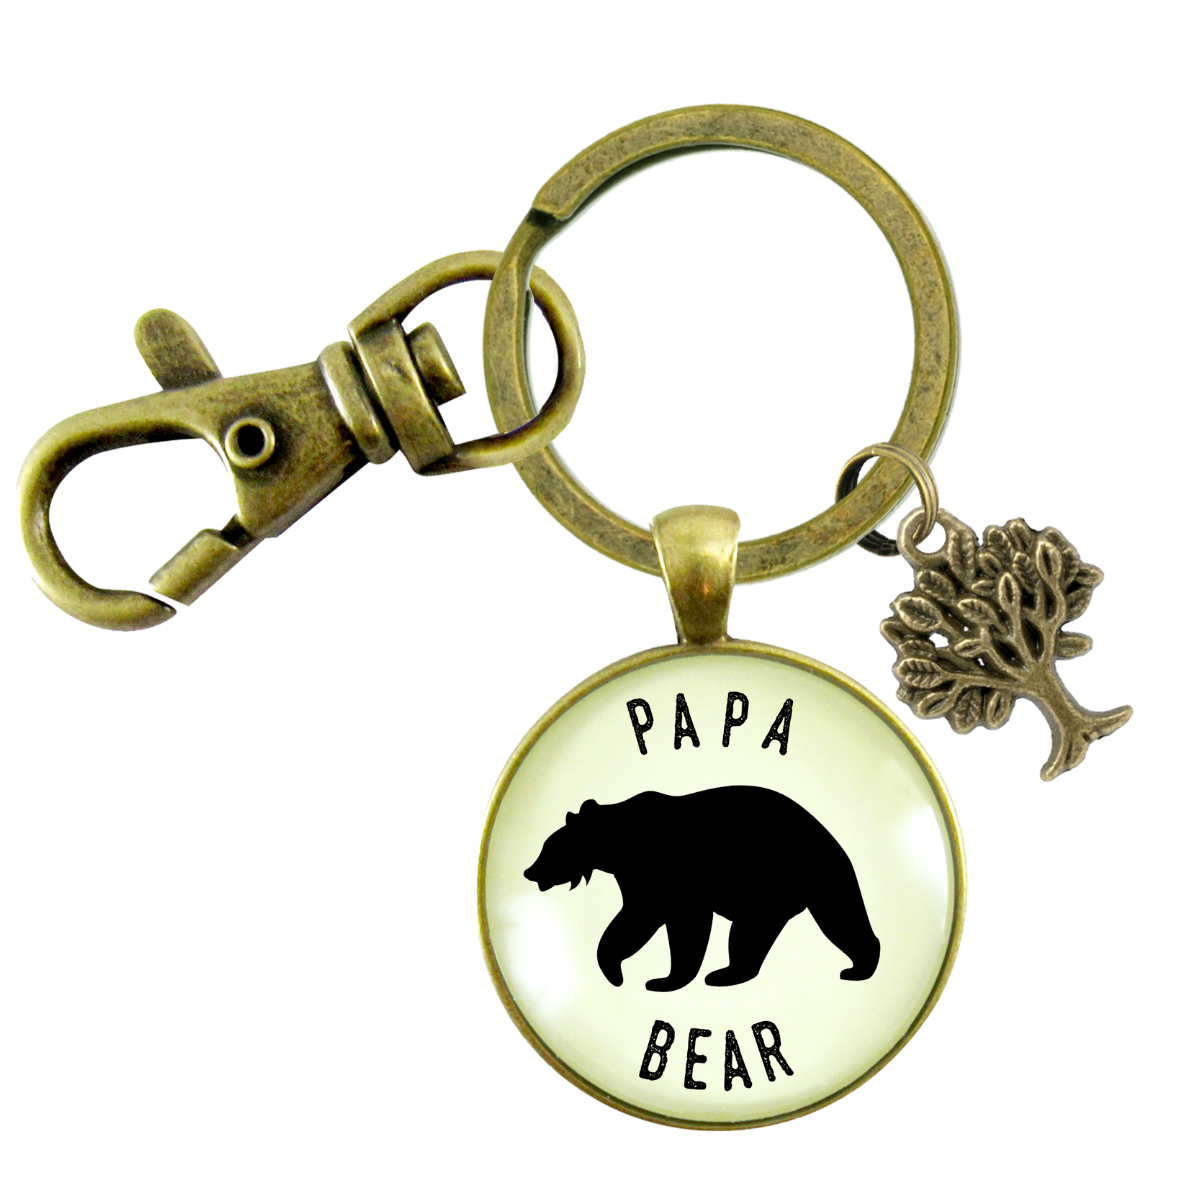 Papa Bear Keychain Fathers Rustic Key Ring Gift Expectant Dad Father Grandpa - Gutsy Goodness Handmade Jewelry;Papa Bear Keychain Fathers Rustic Key Ring Gift Expectant Dad Father Grandpa - Gutsy Goodness Handmade Jewelry Gifts